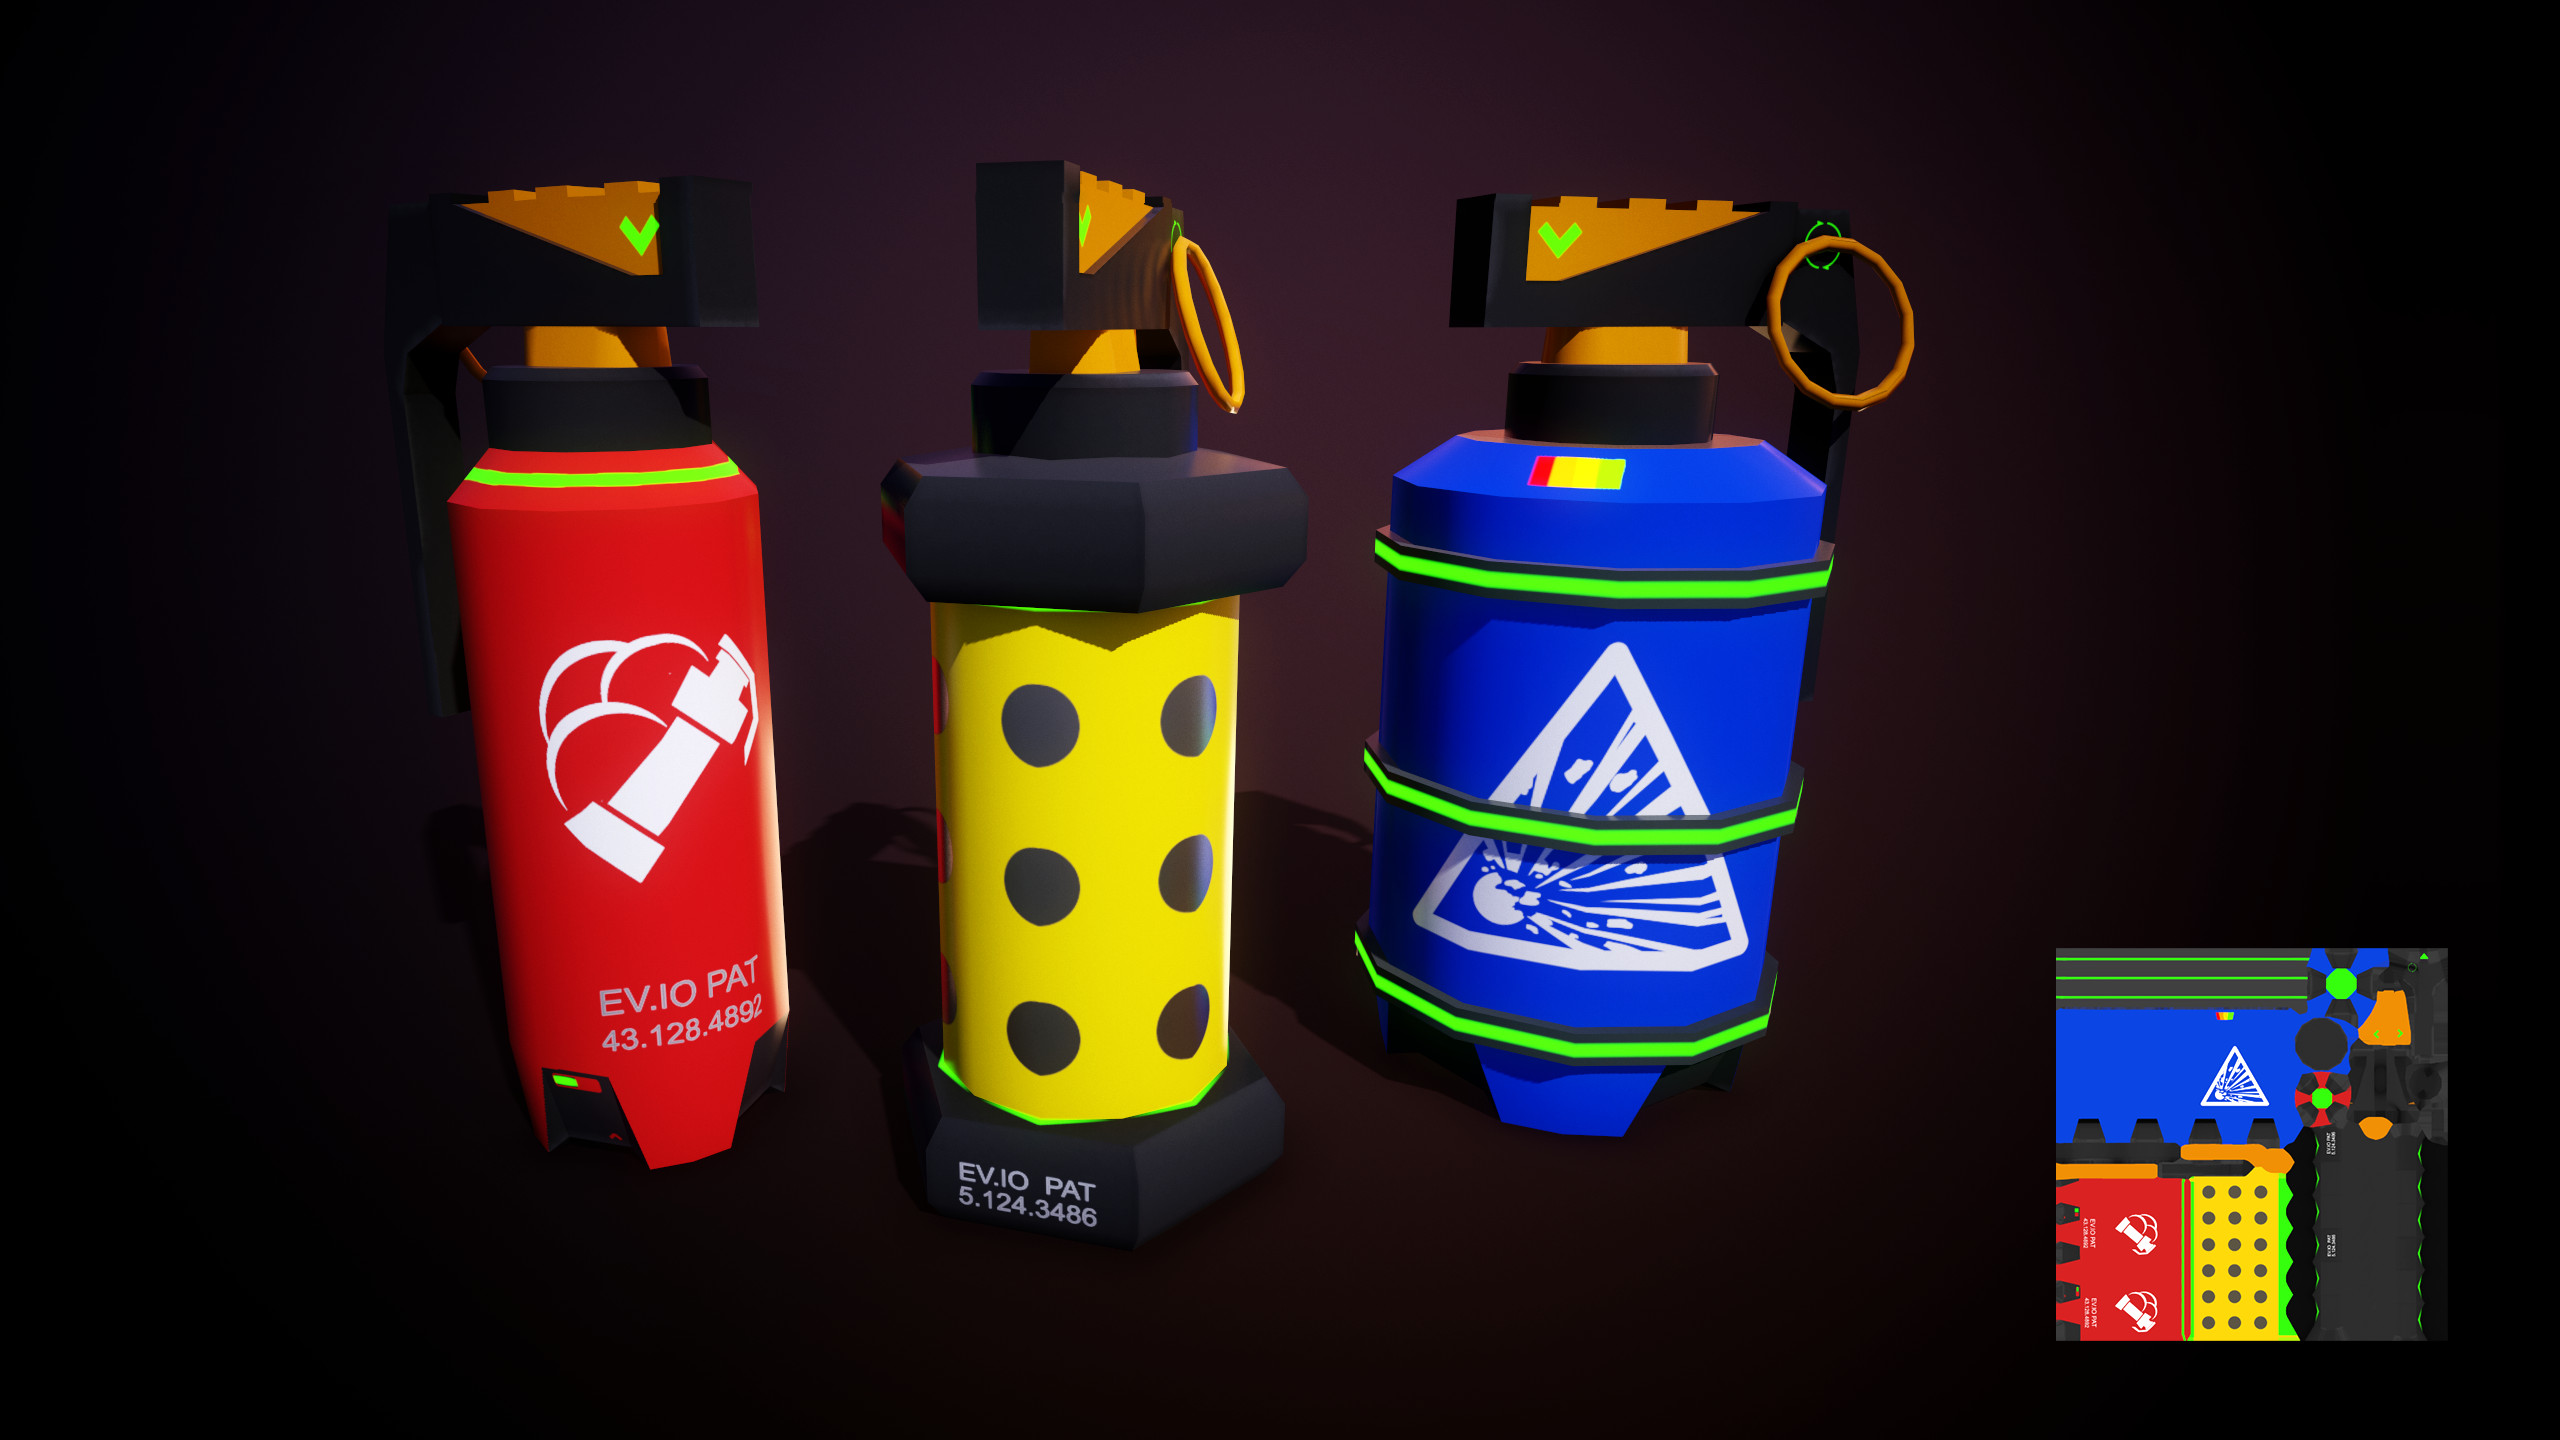 The 3 grenade types available in the game Smoke, Flash, and Fragmentation. All three were created with a single shared 512 basecolor texture.